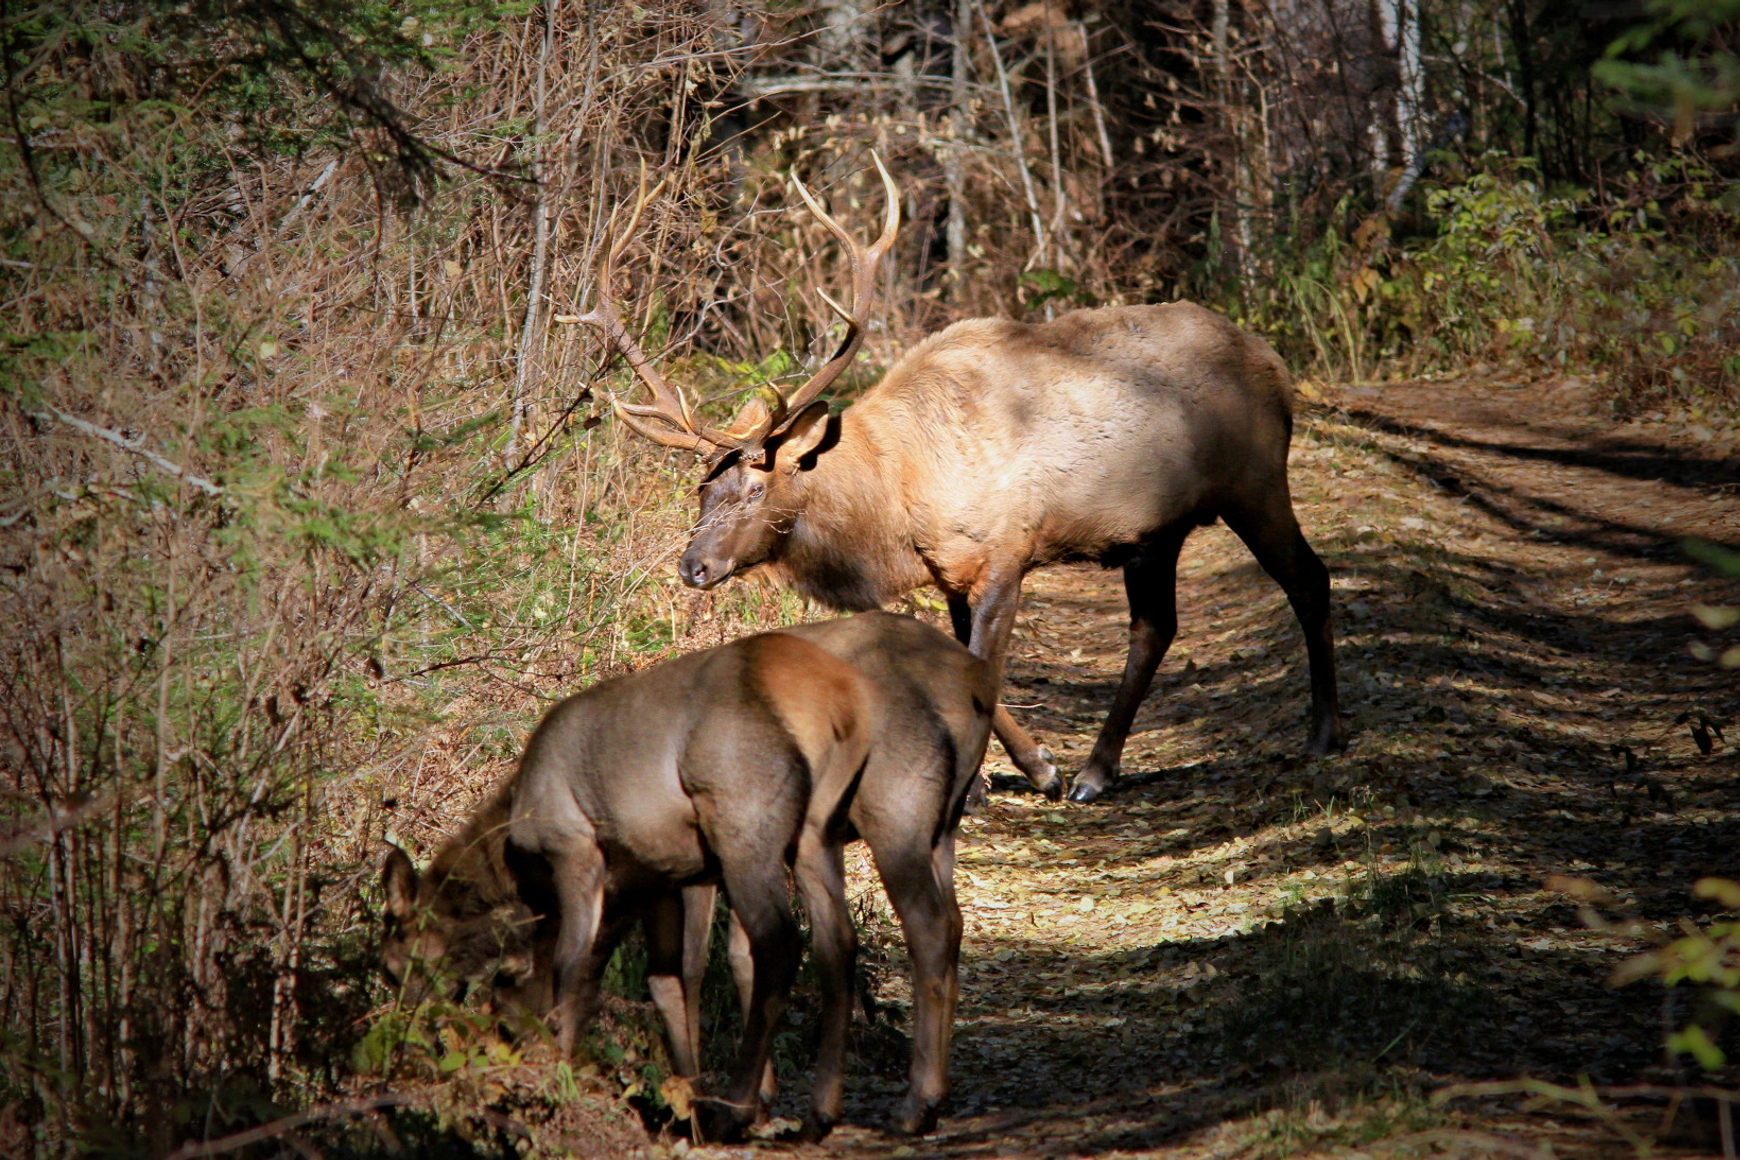 A large bull elk and two cows in forested setting